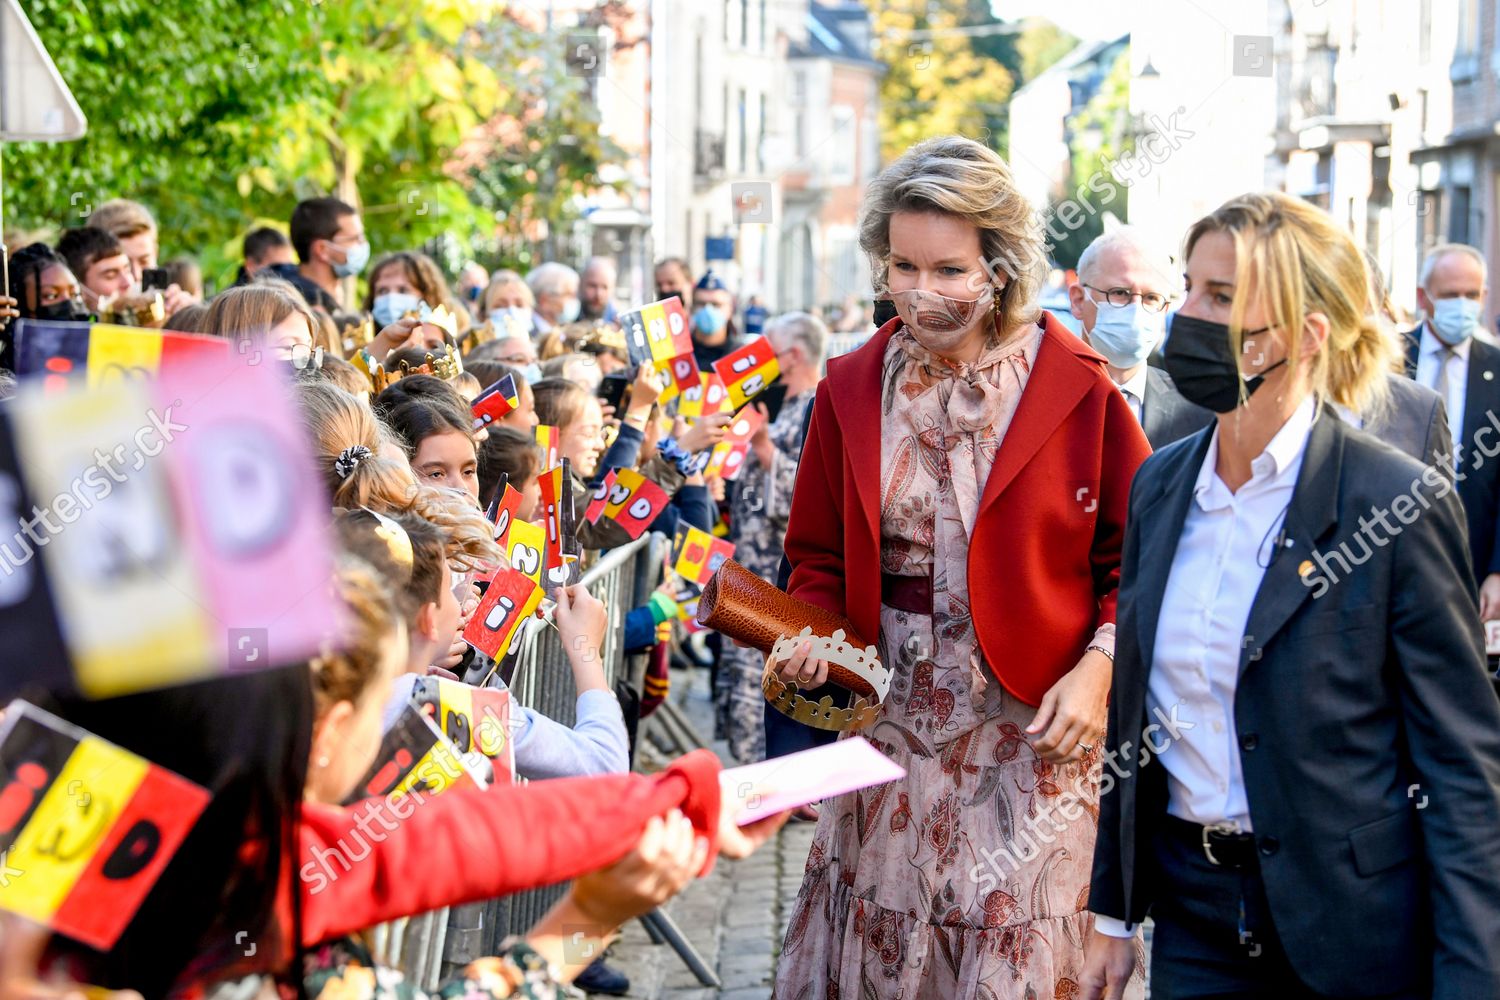 queen-mathilde-and-king-philippe-visit-the-province-of-luxembourg-vielsalm-belgium-shutterstock-editorial-12529850ai.jpg